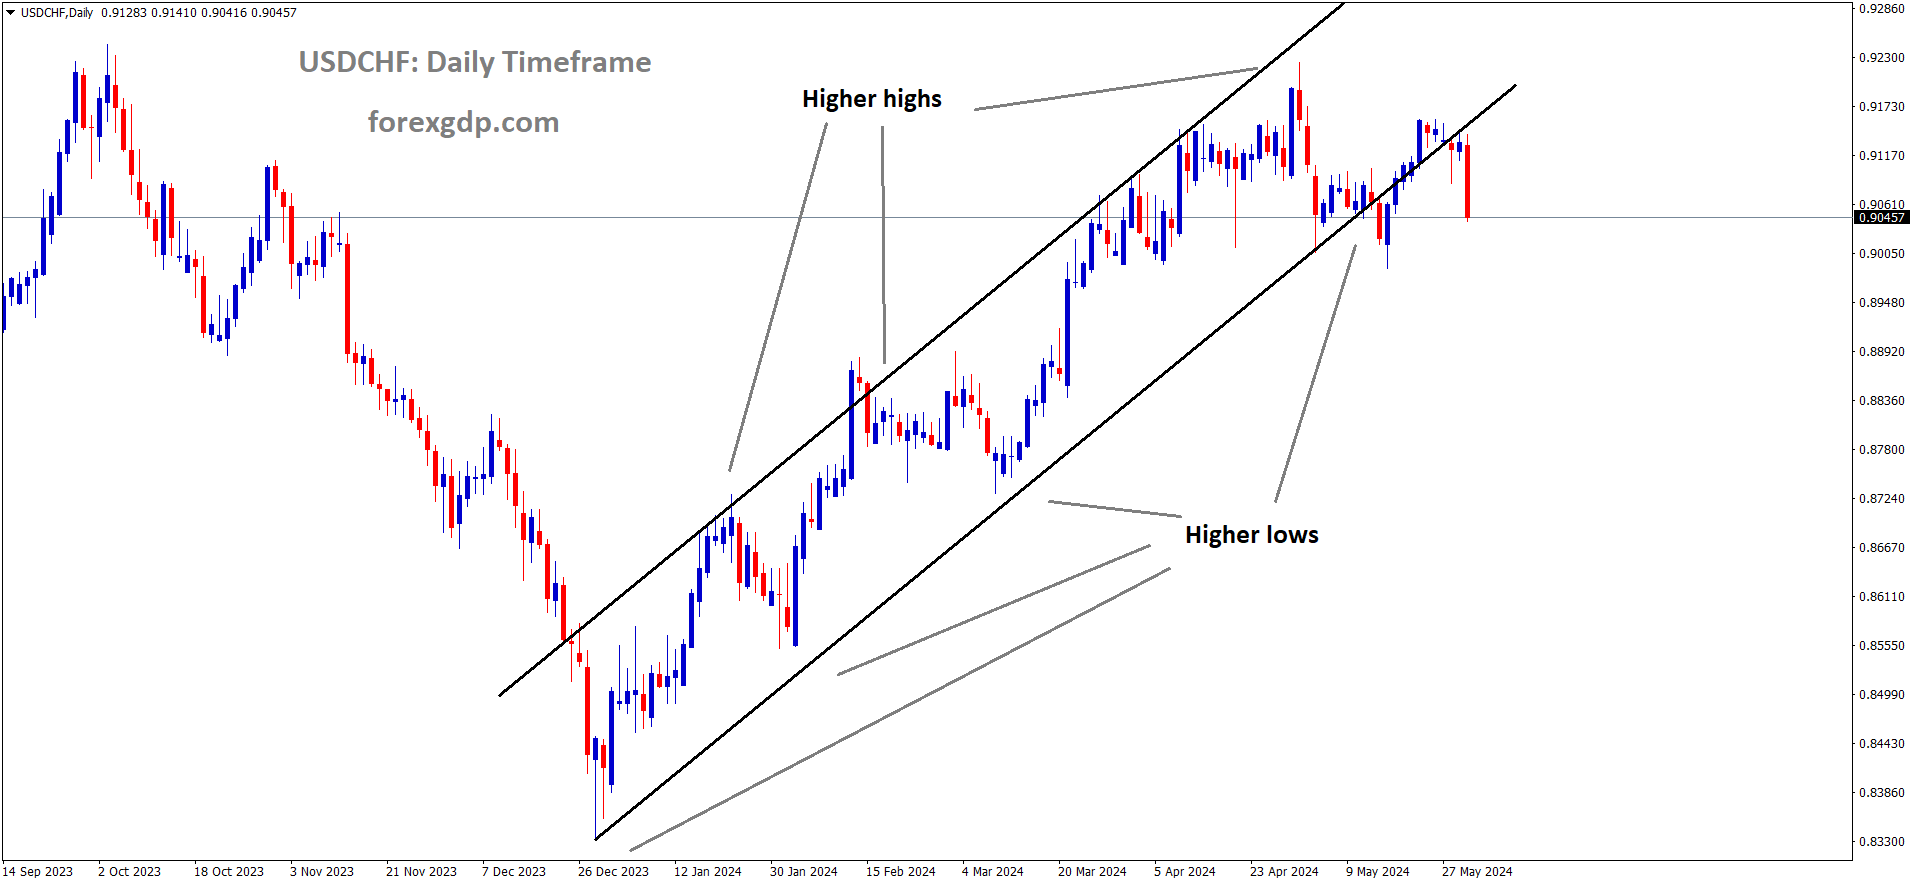 USDCHF is moving in Ascending channel and market has reached higher low area of the channel